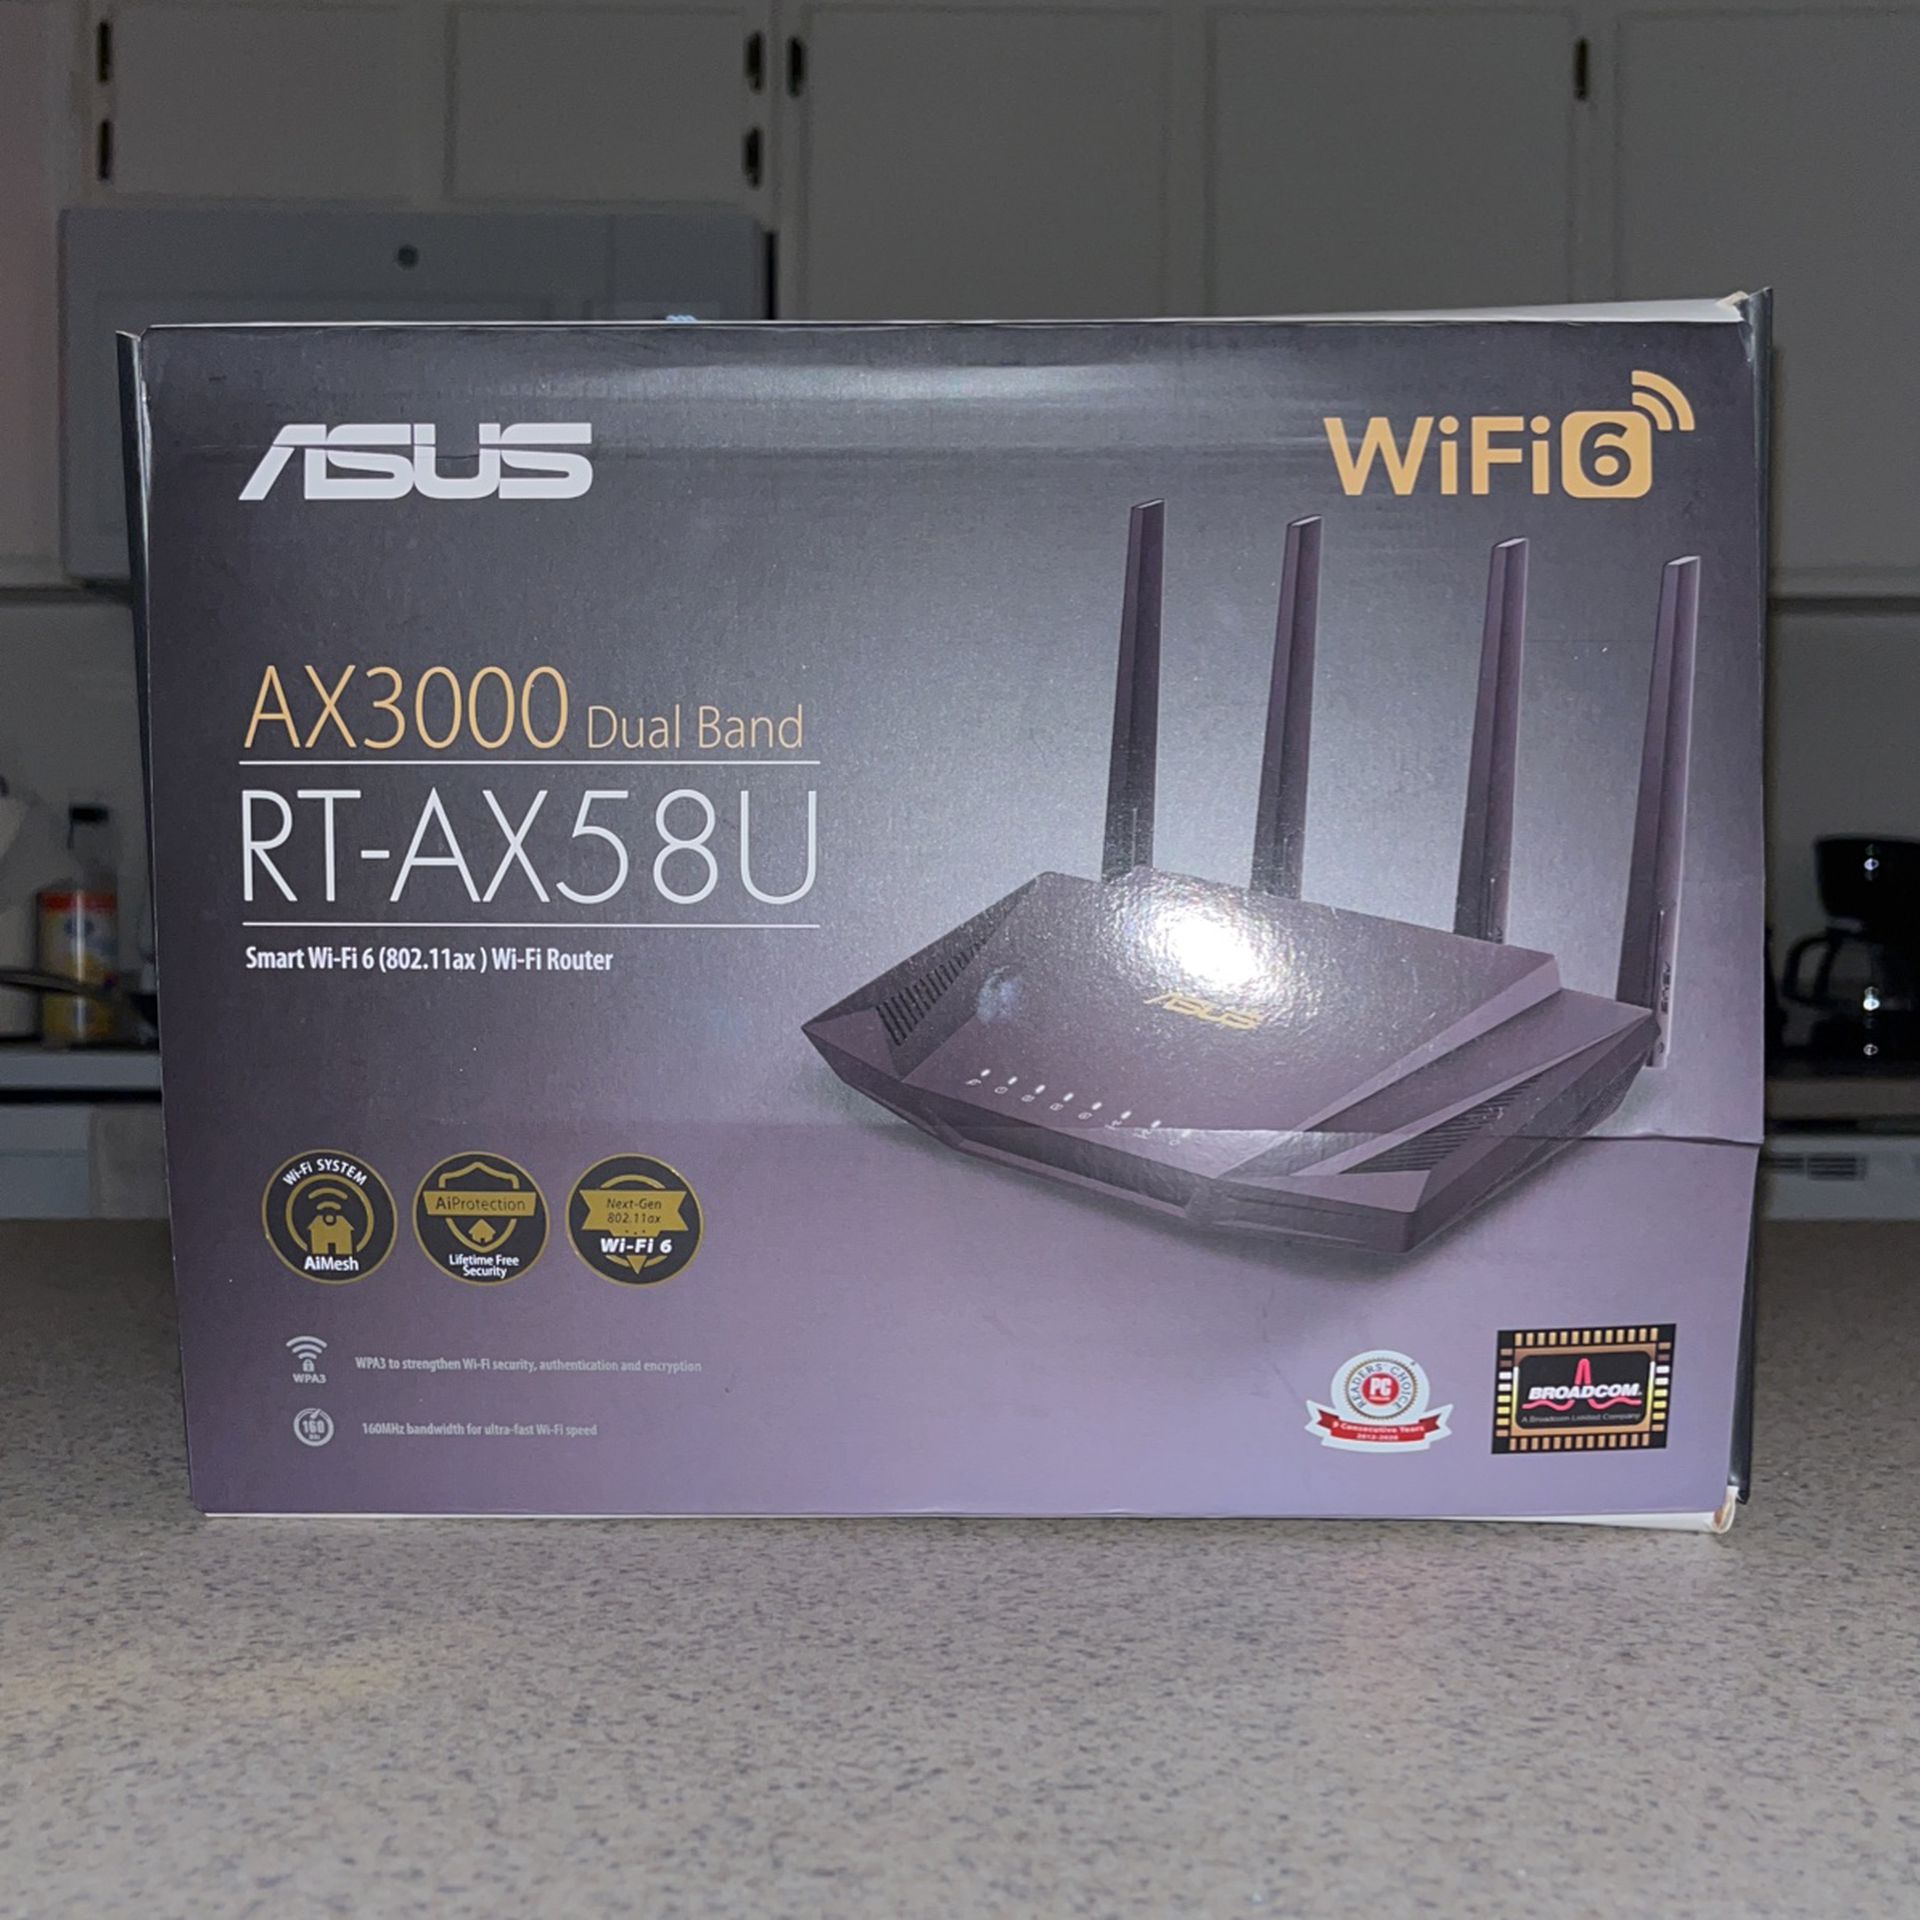 ASUS- AX3000 Dual-Band WiFi 6 Wireless Router With Lifetime